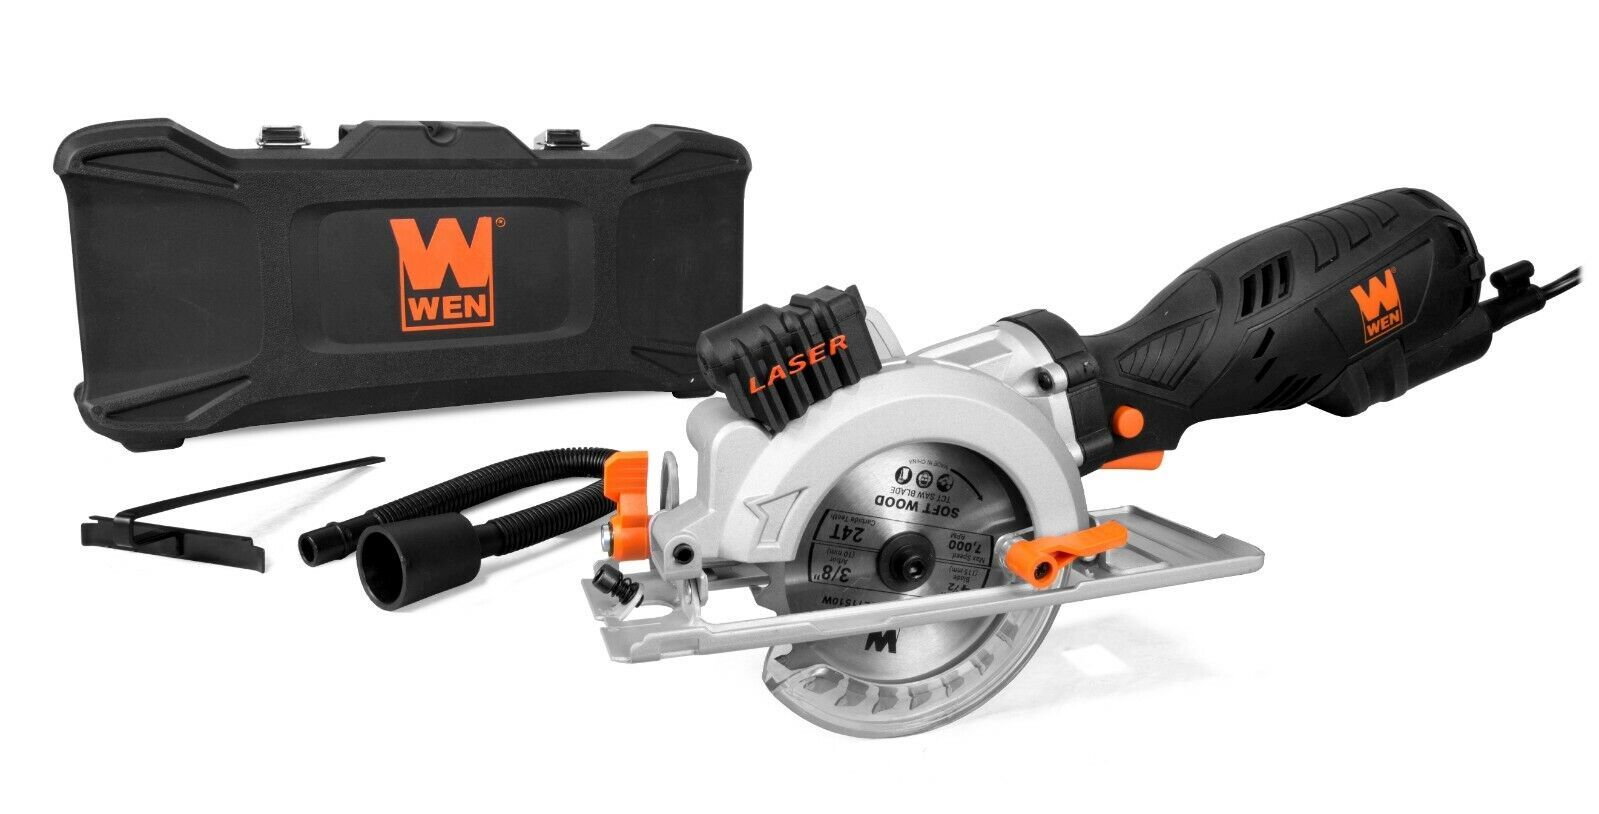 Wen 3625 5-Amp 4-1/2" Beveling Compact Circular Saw With Laser And Carrying Case - $108.97